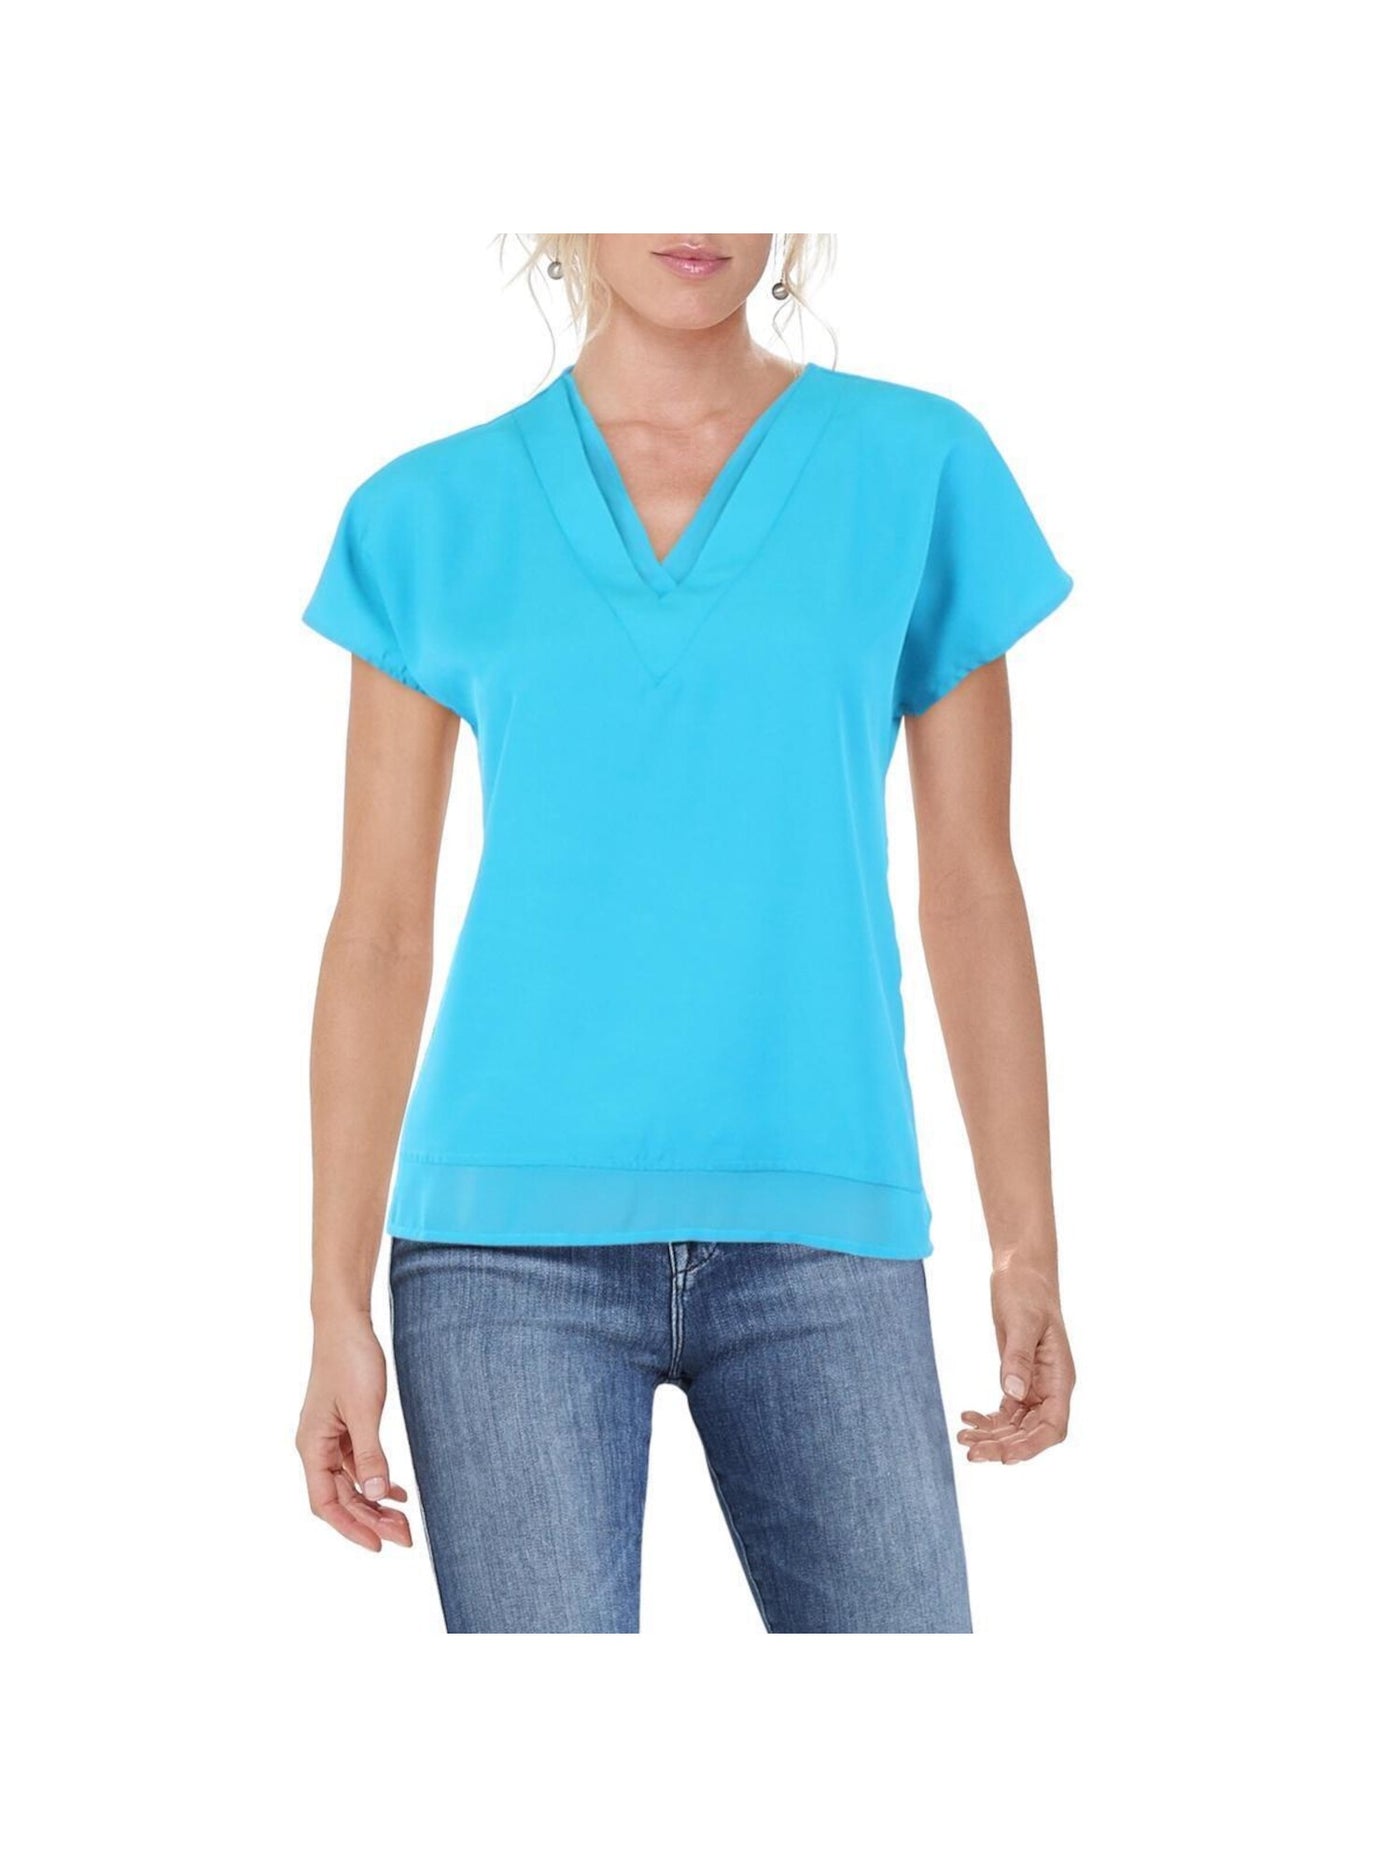 DKNY Womens Turquoise Textured Faux Layered Vented Hem Short Sleeve V Neck T-Shirt S